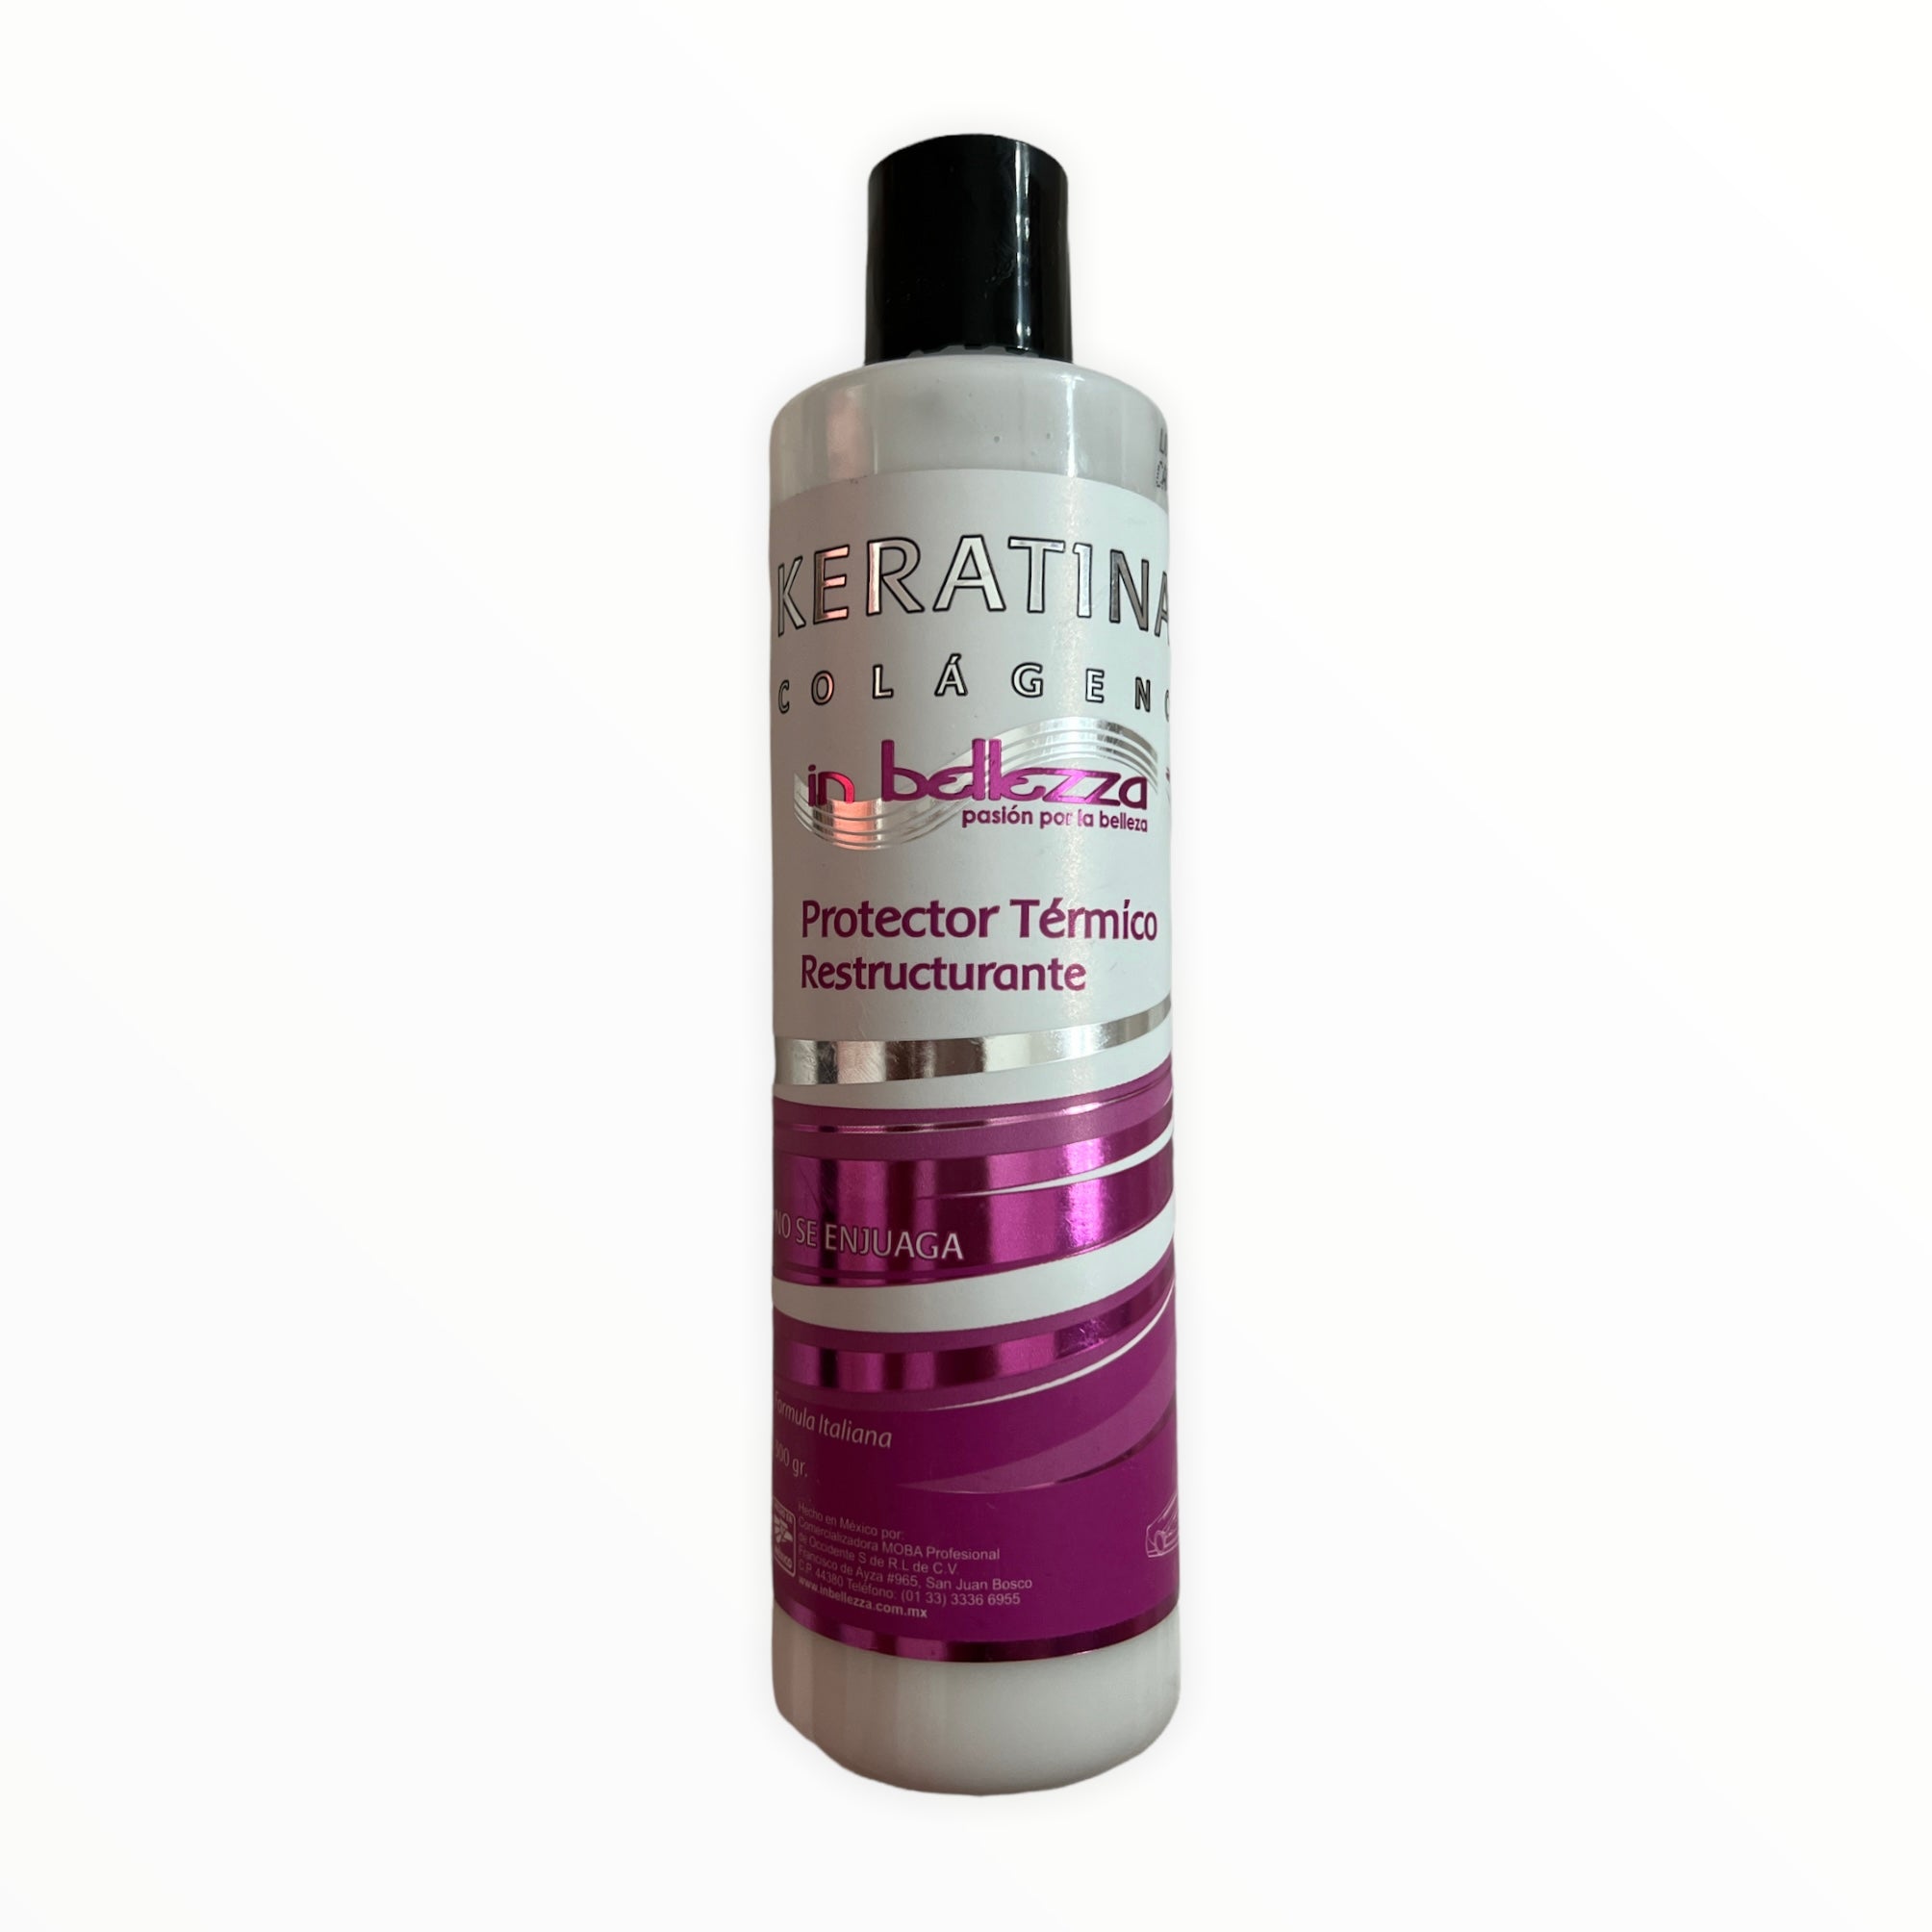 Keratin and Collagen Restructuring Thermal Protector